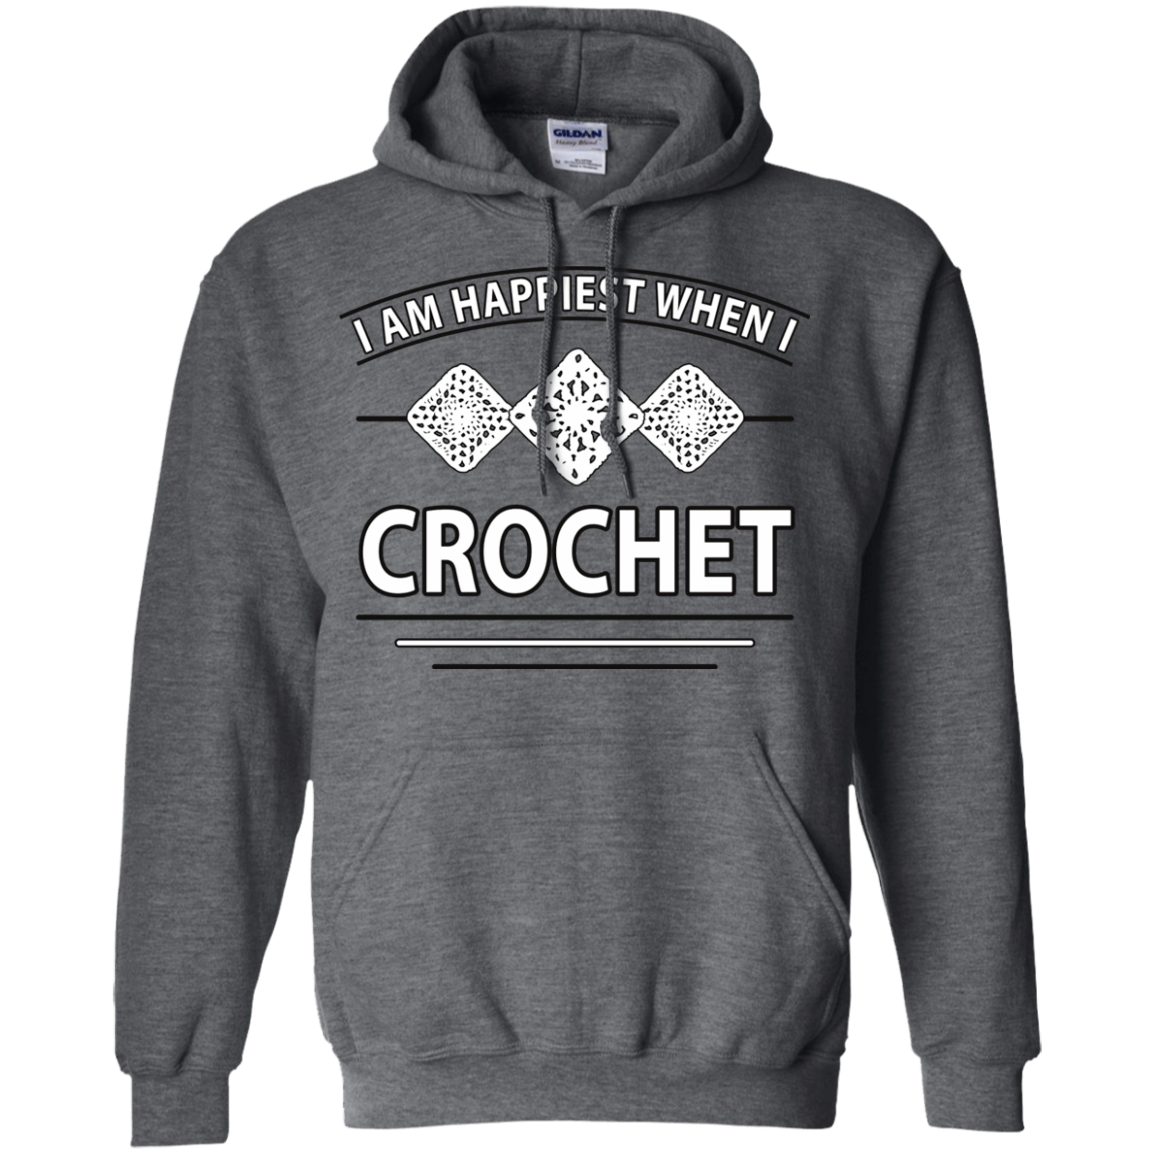 I Am Happiest When I Crochet Pullover Hoodies - Crafter4Life - 5